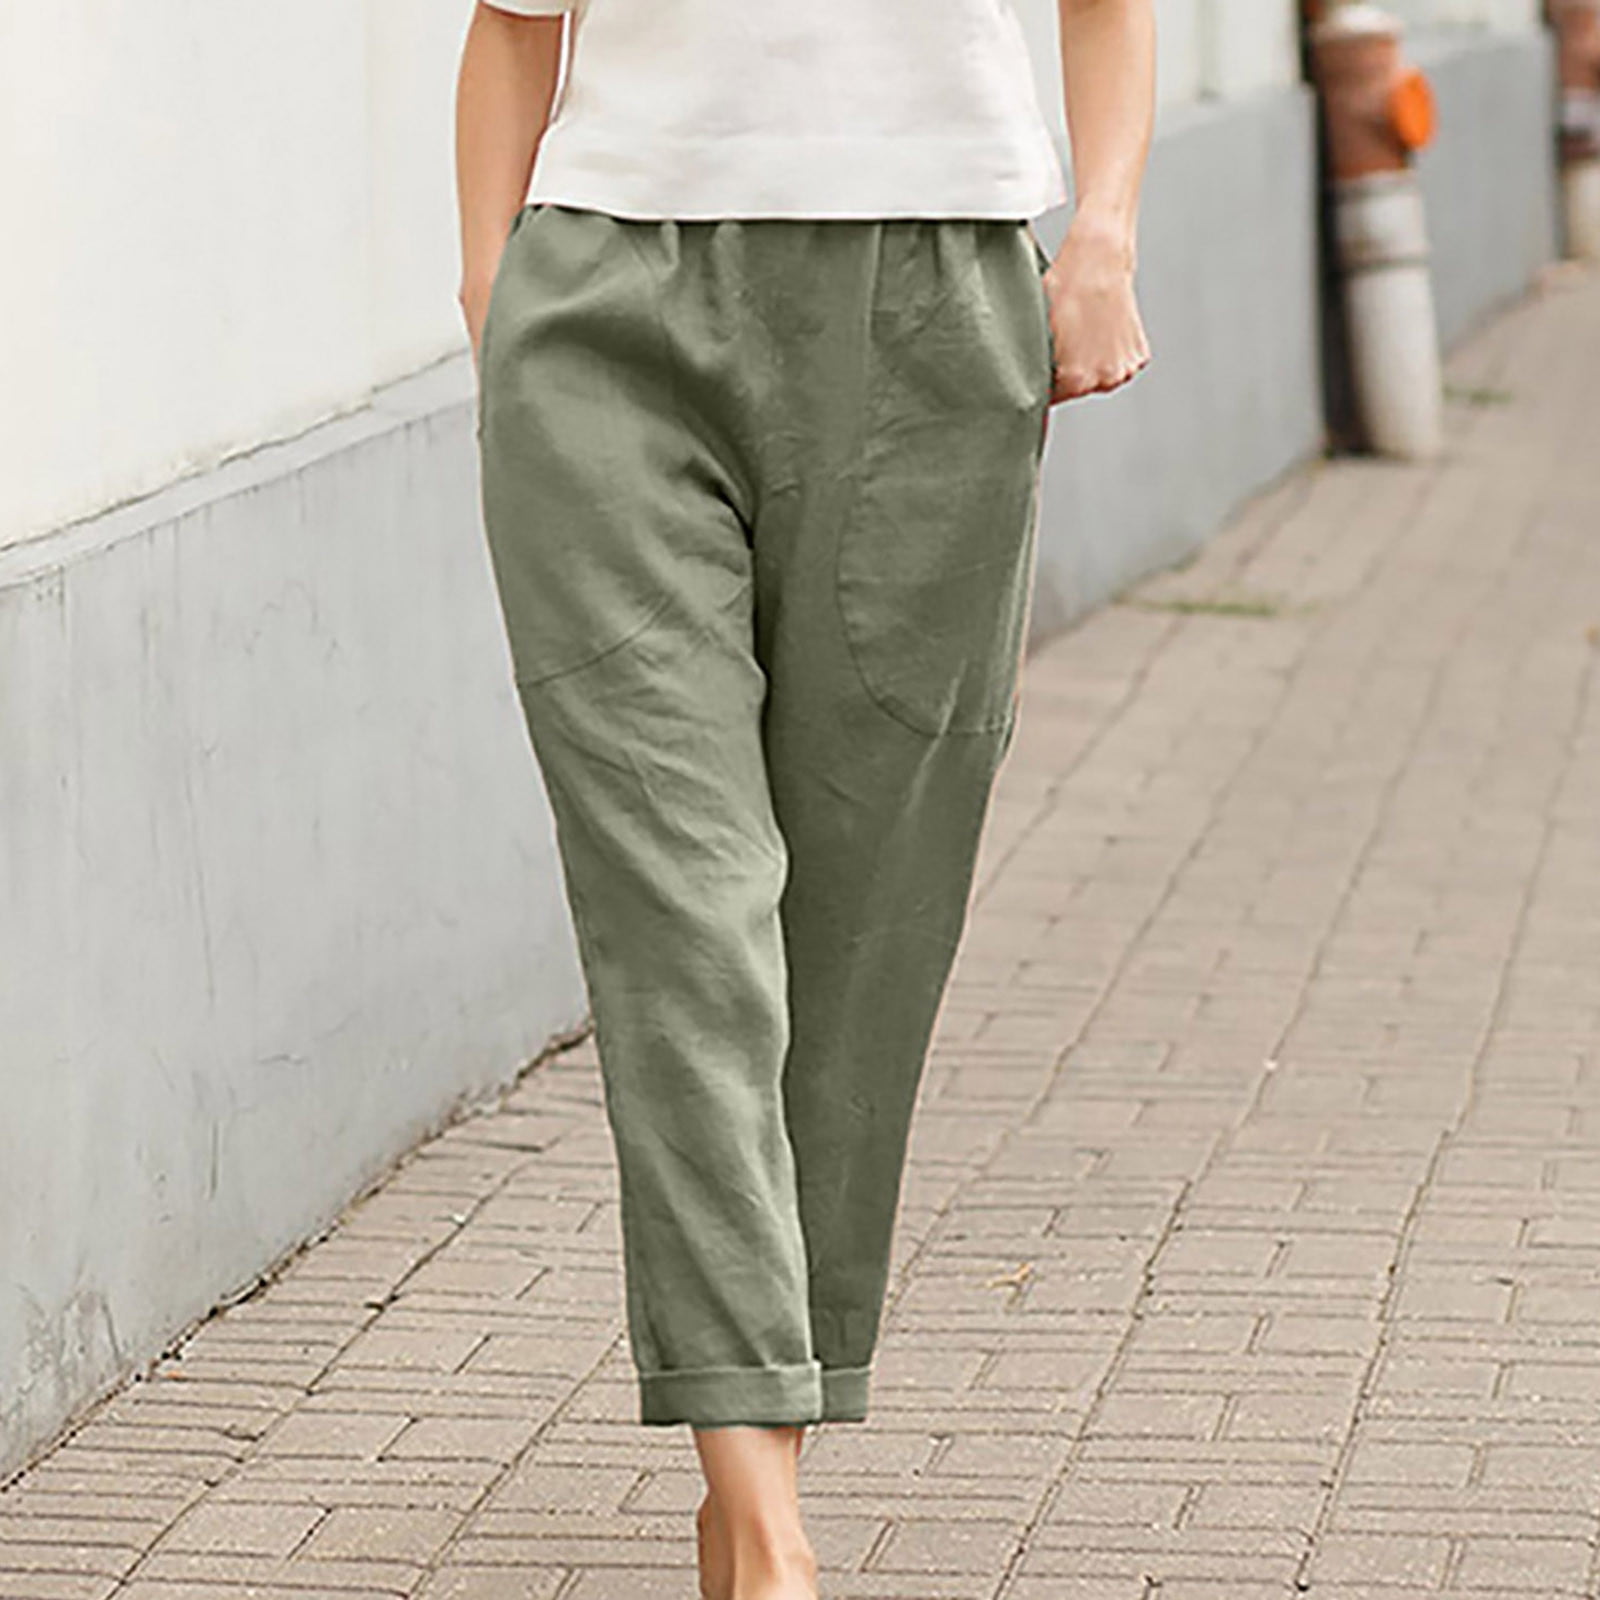 Spring Trends,POROPL Plus Size Fashion Elastic Waist Casual Solid Straight  Leg Cotton Linen Cropped Pocket Trousers Khaki Pants for Women Clearance